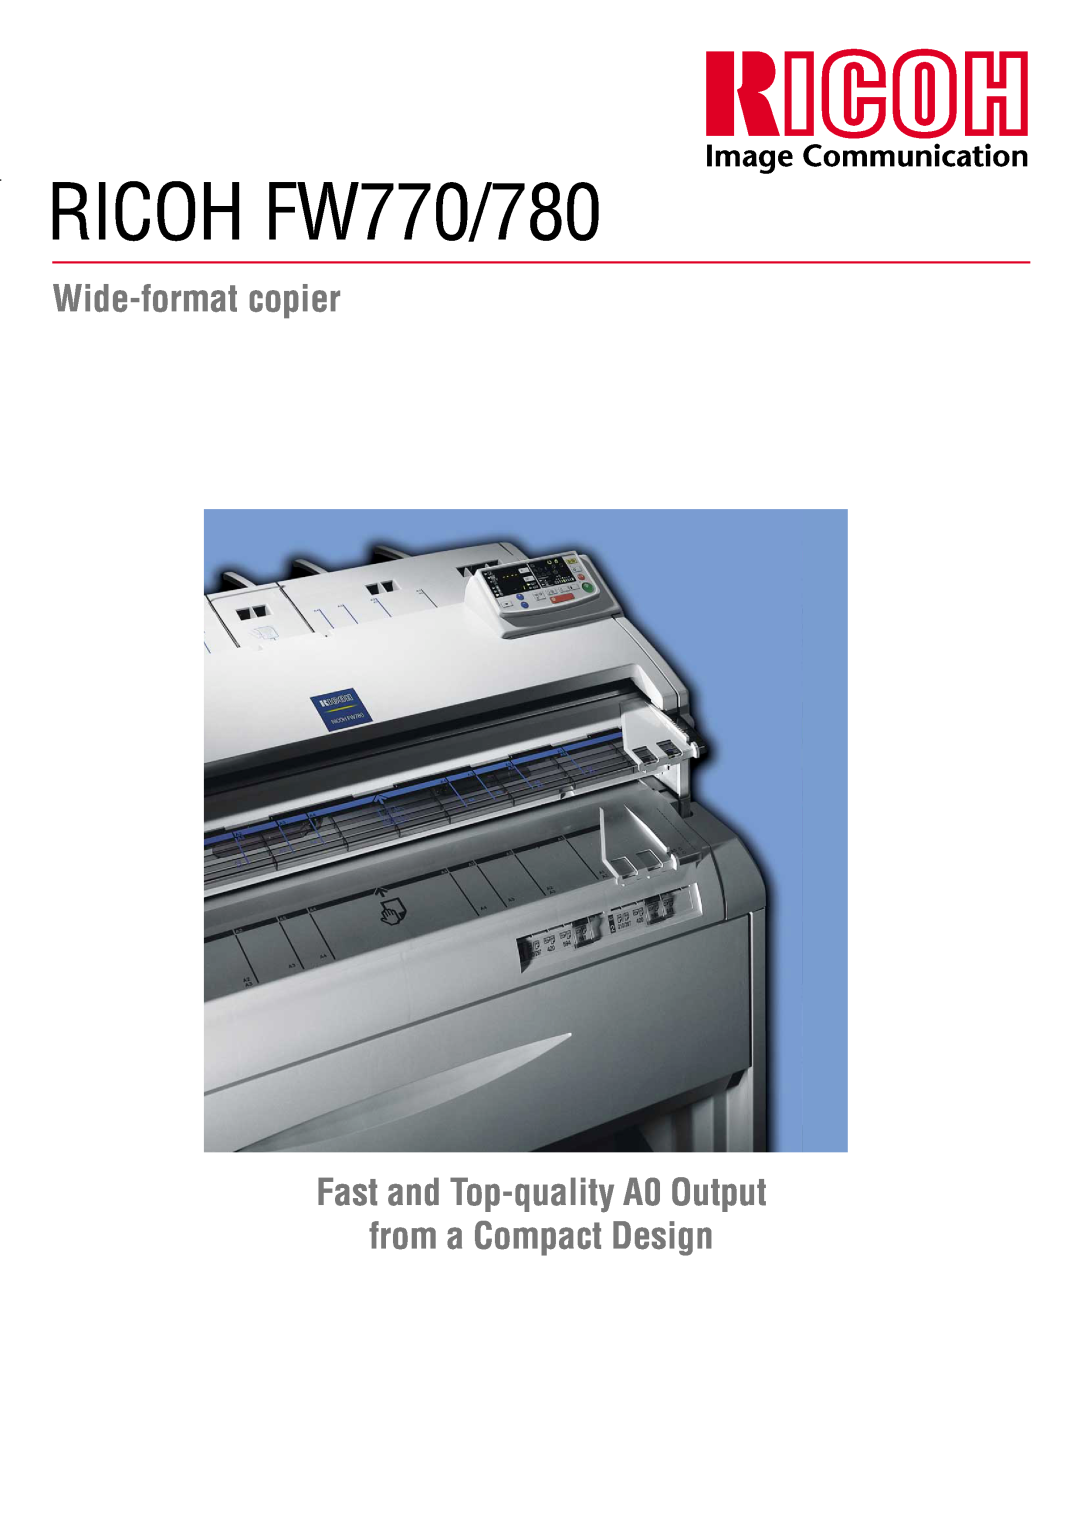 Ricoh FW780 manual RICOH FW770/780, Wide-format copier, Fast and Top-quality A0 Output from a Compact Design 